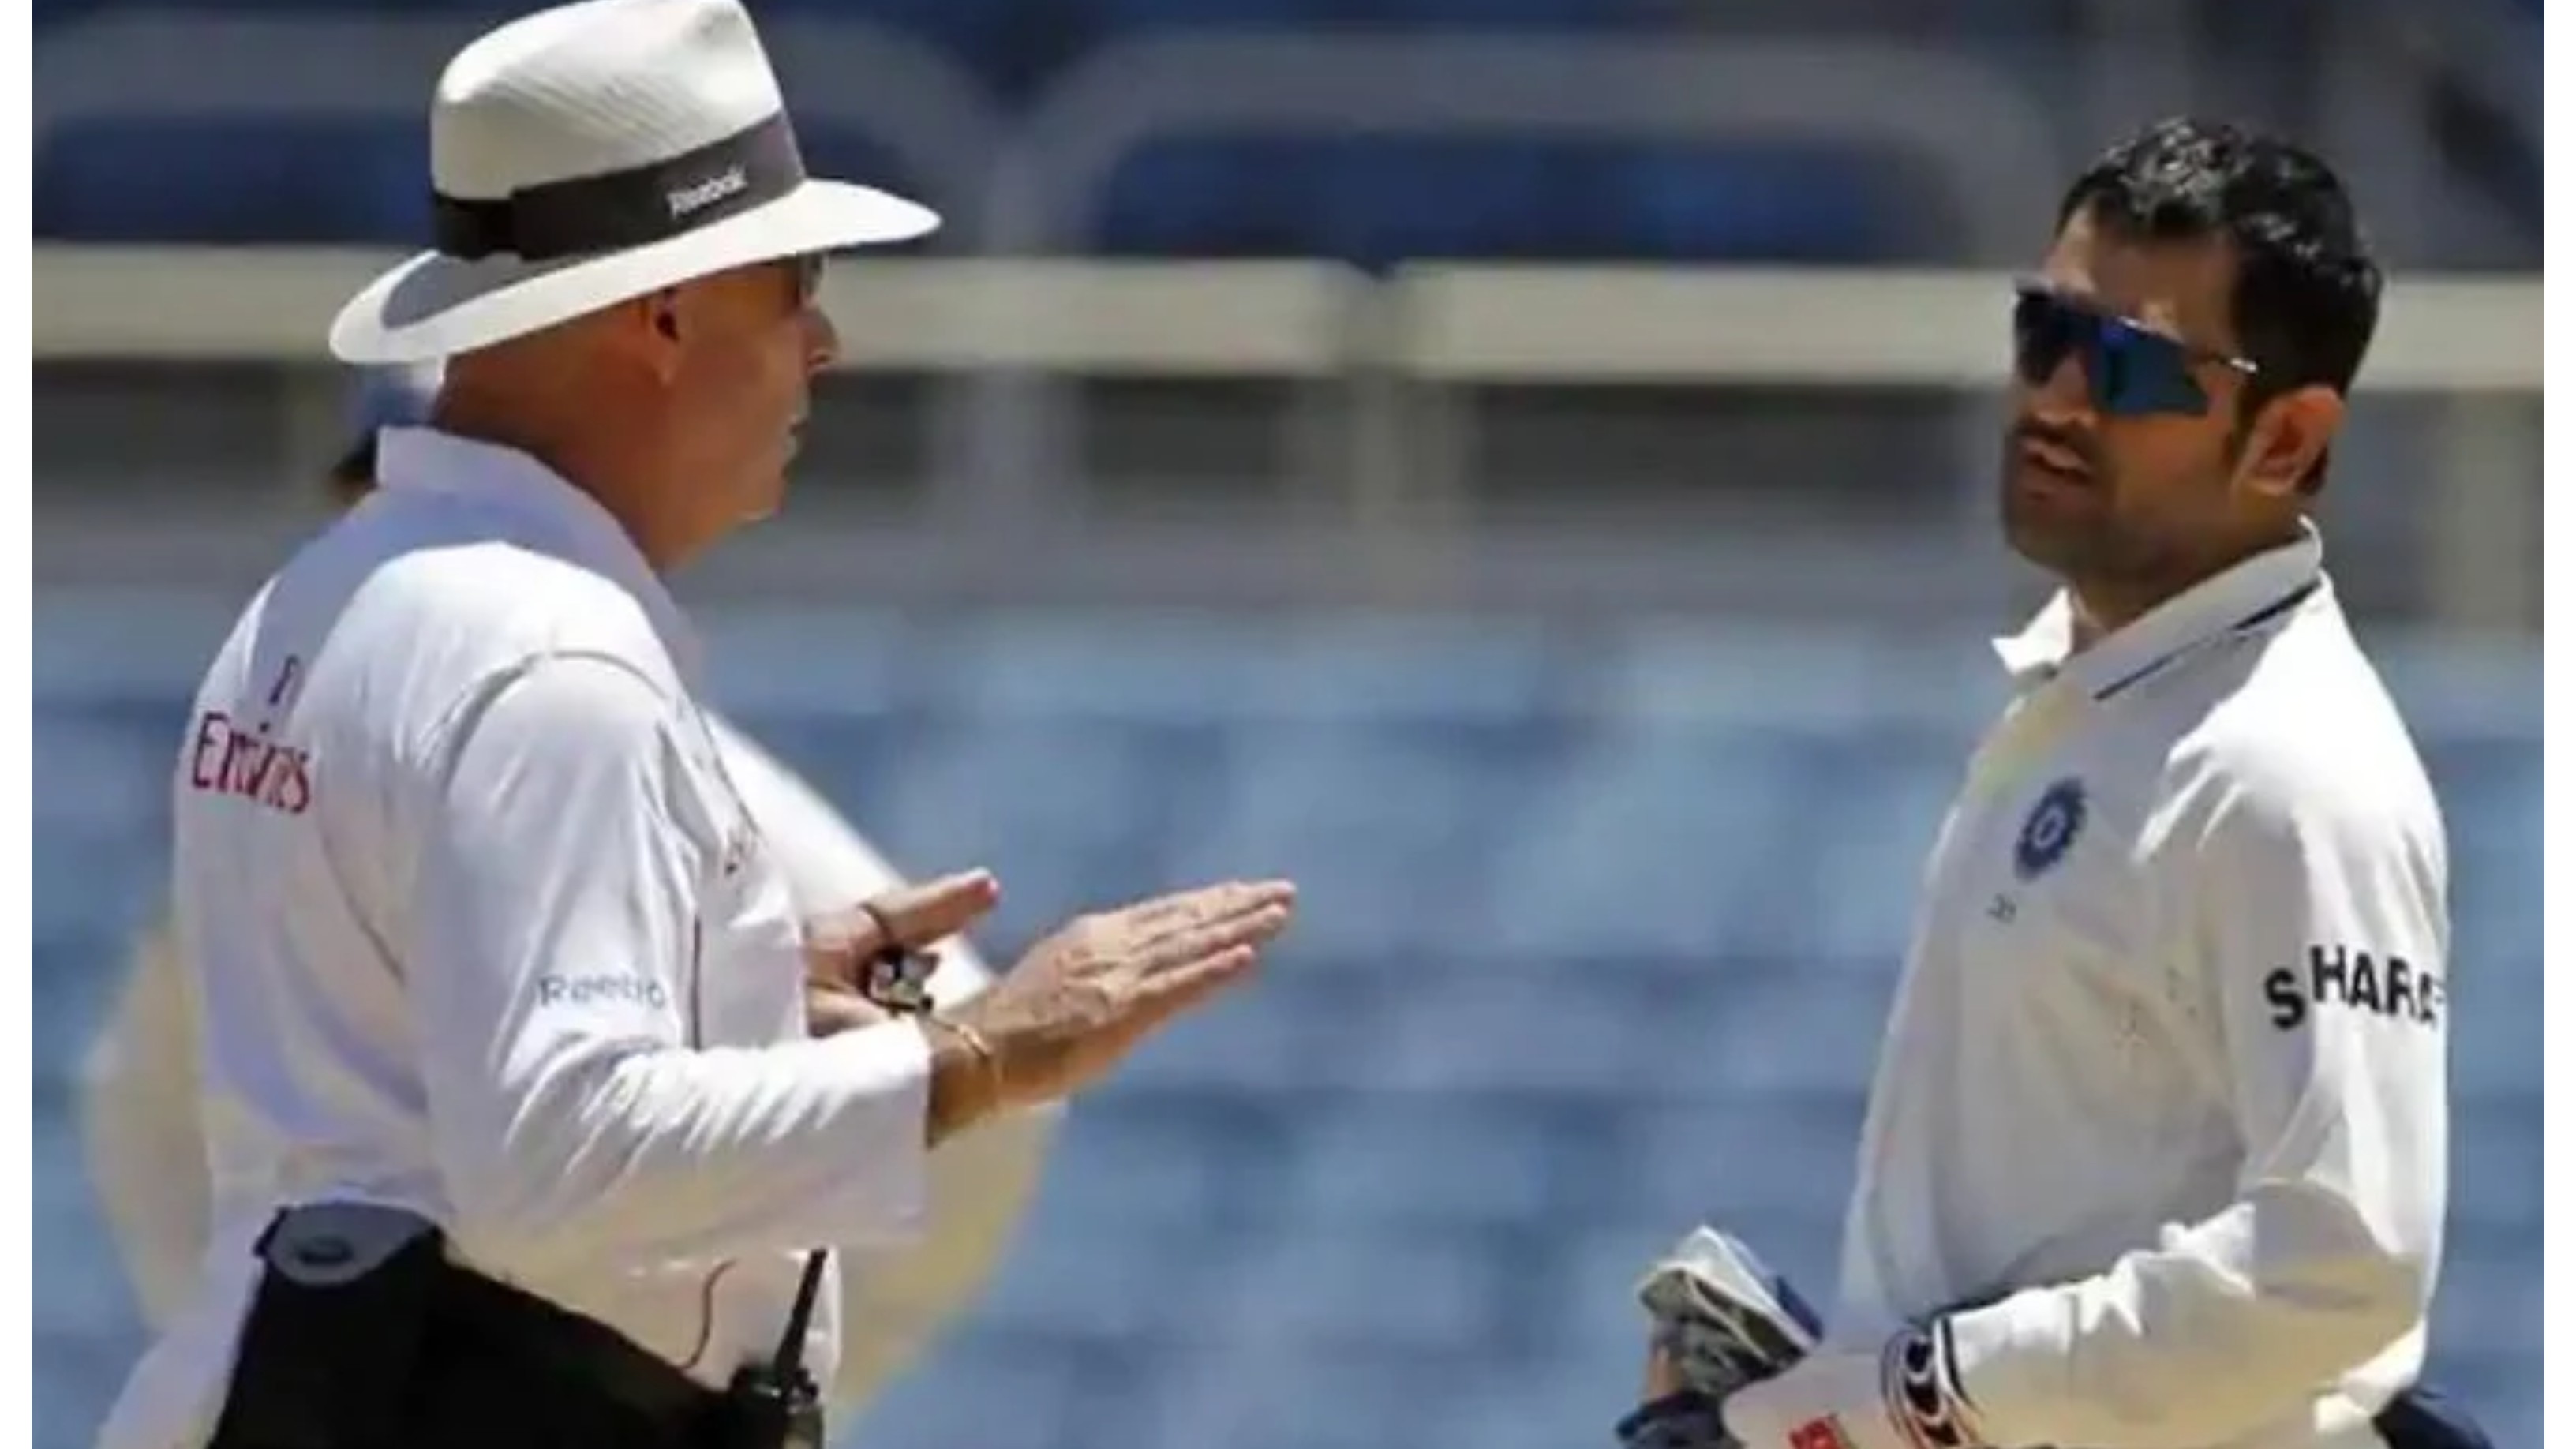 MS Dhoni told me ‘we’ve had trouble with you before’: former umpire Daryl Harper